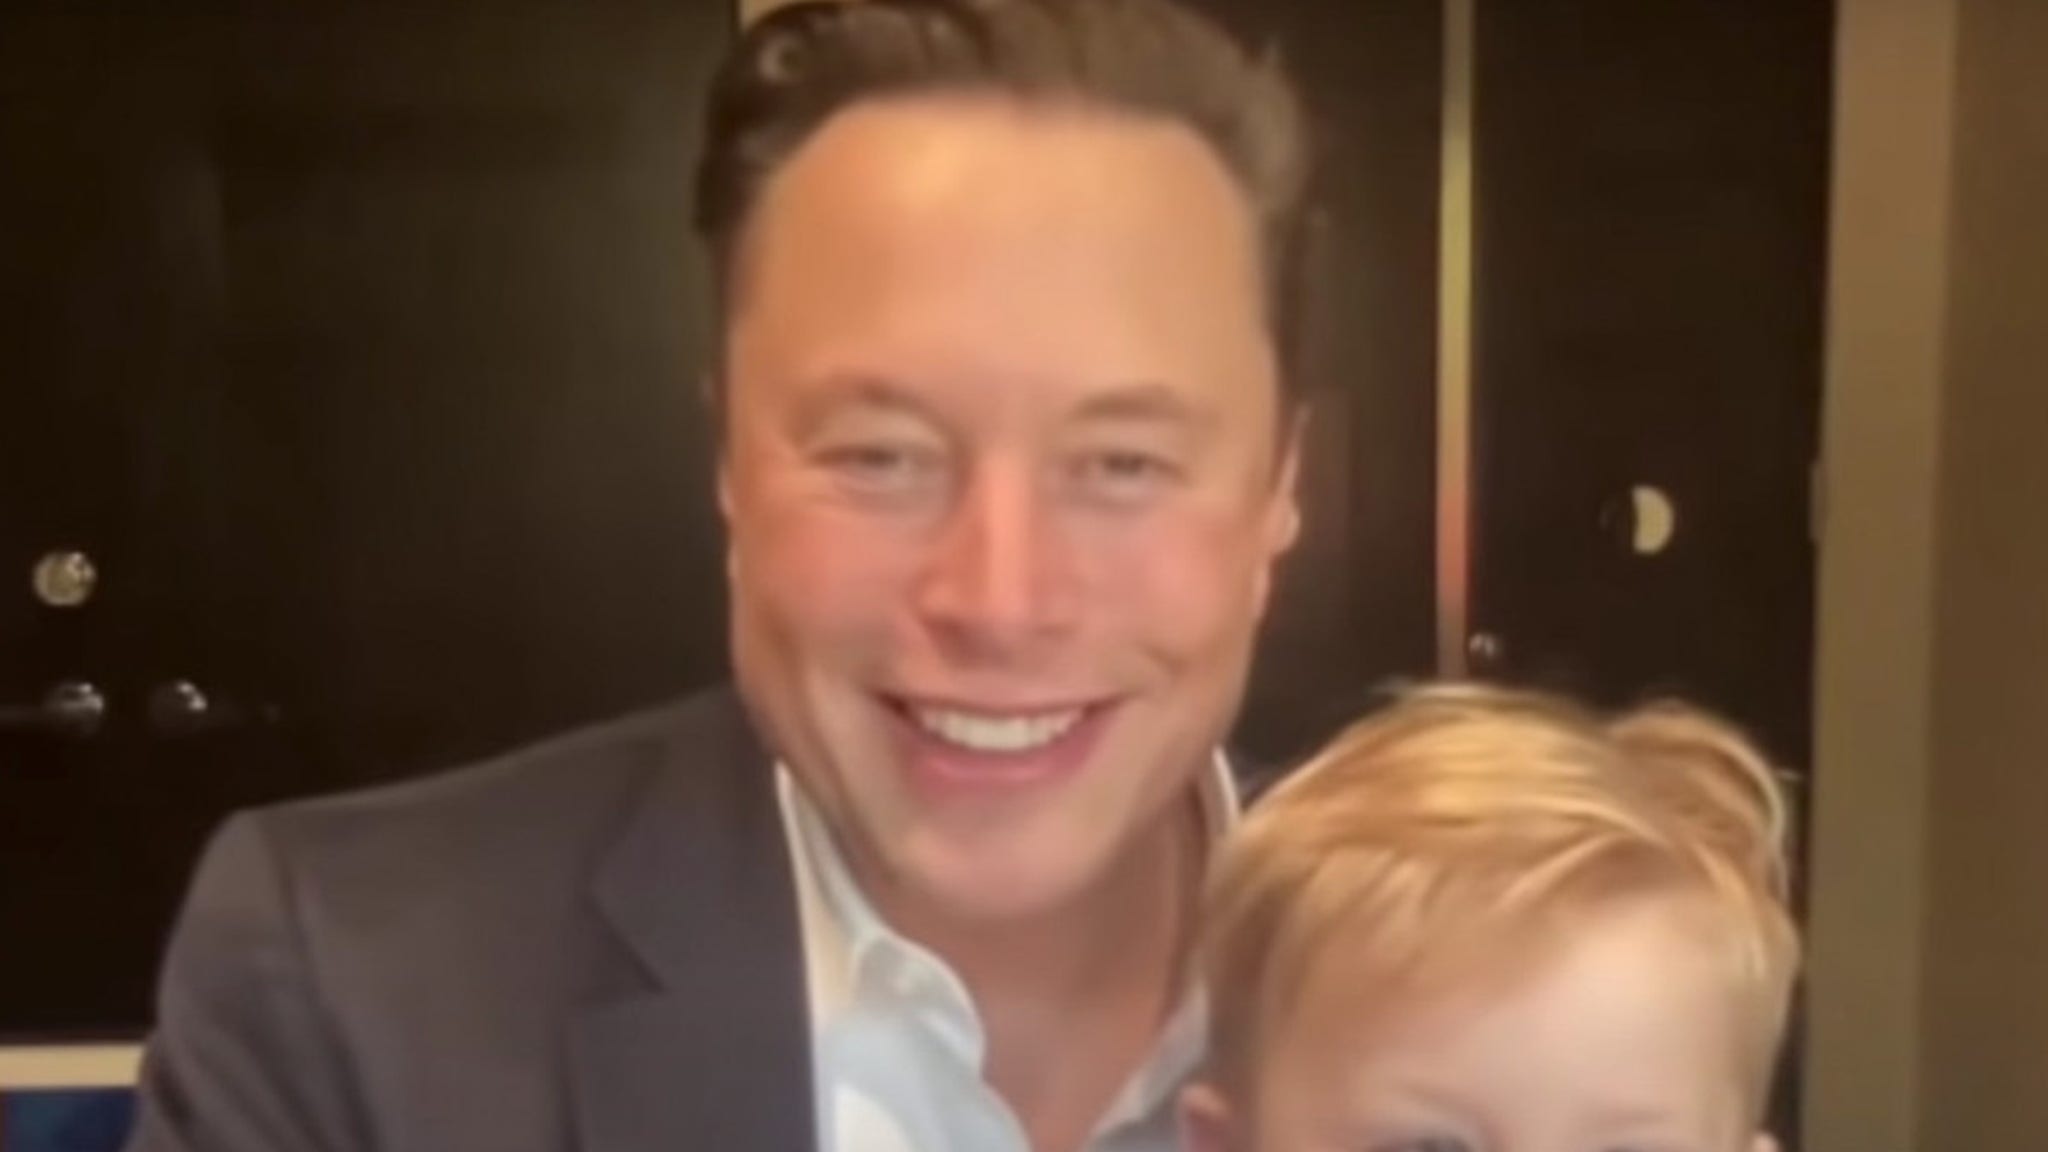 Elon Musk's Baby Boy Makes Appearance During Space Presentation - TMZ